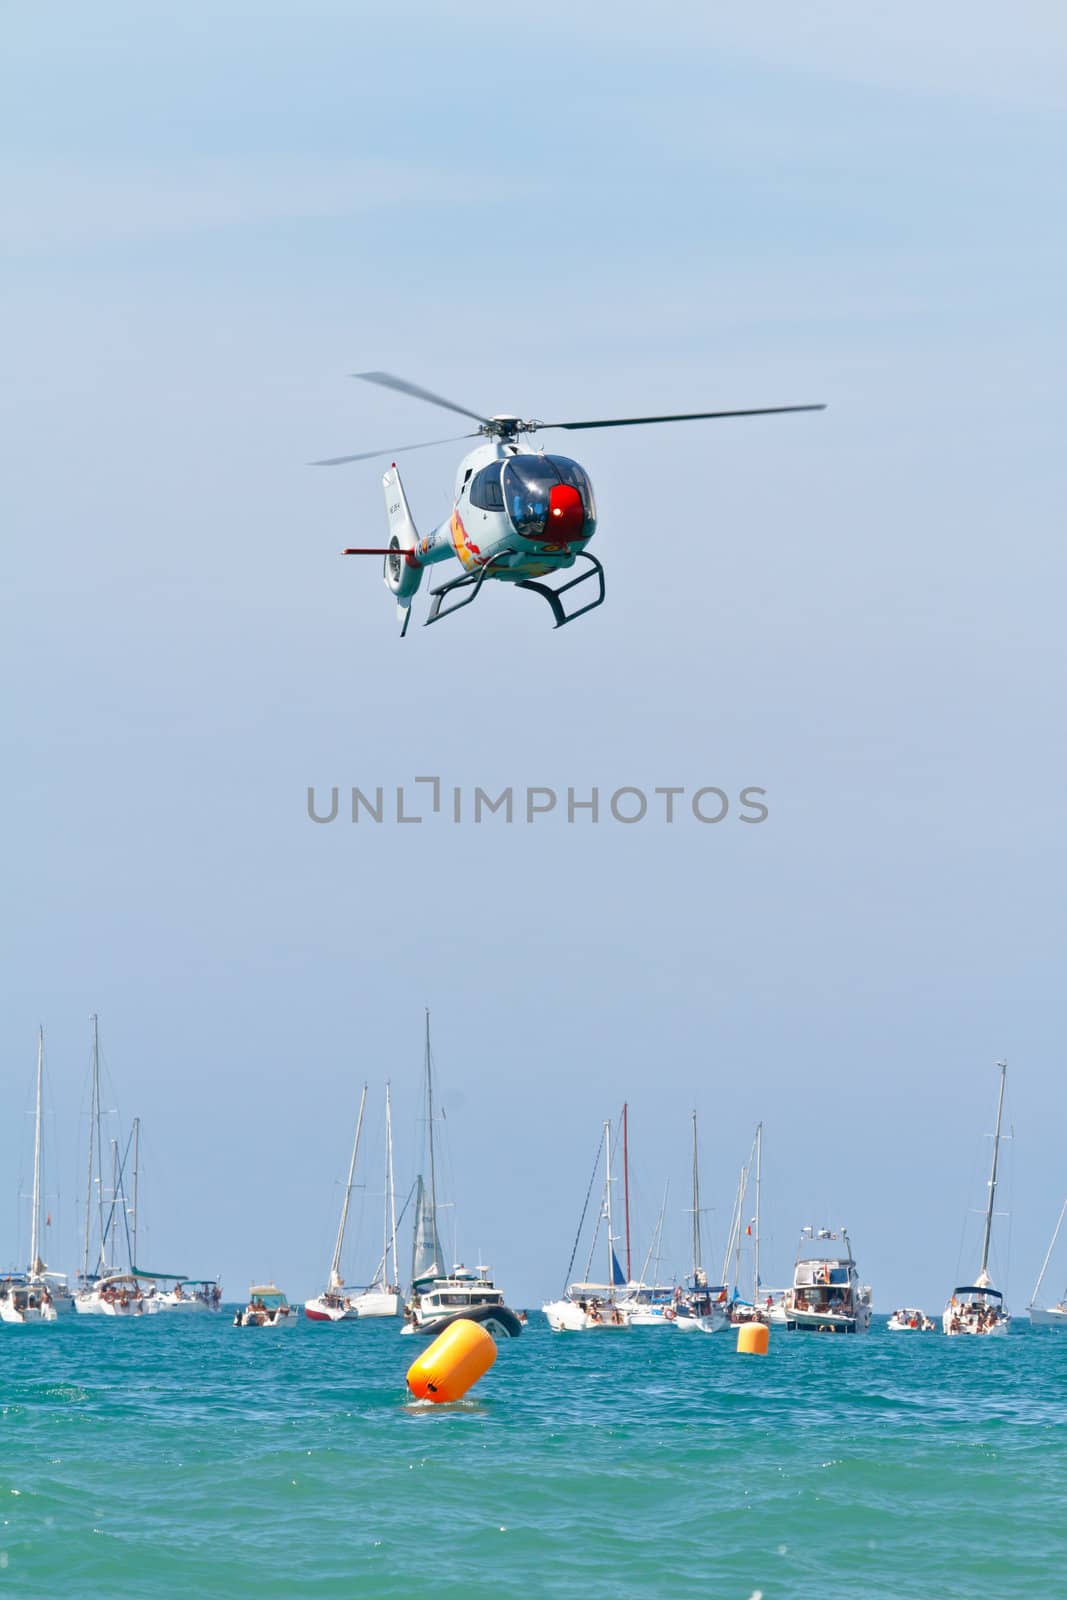 CADIZ, SPAIN-SEP 11: Helicopters of the Patrulla Aspa taking part in an exhibition on the 4th airshow of Cadiz on Sep 11, 2011, in Cadiz, Spain